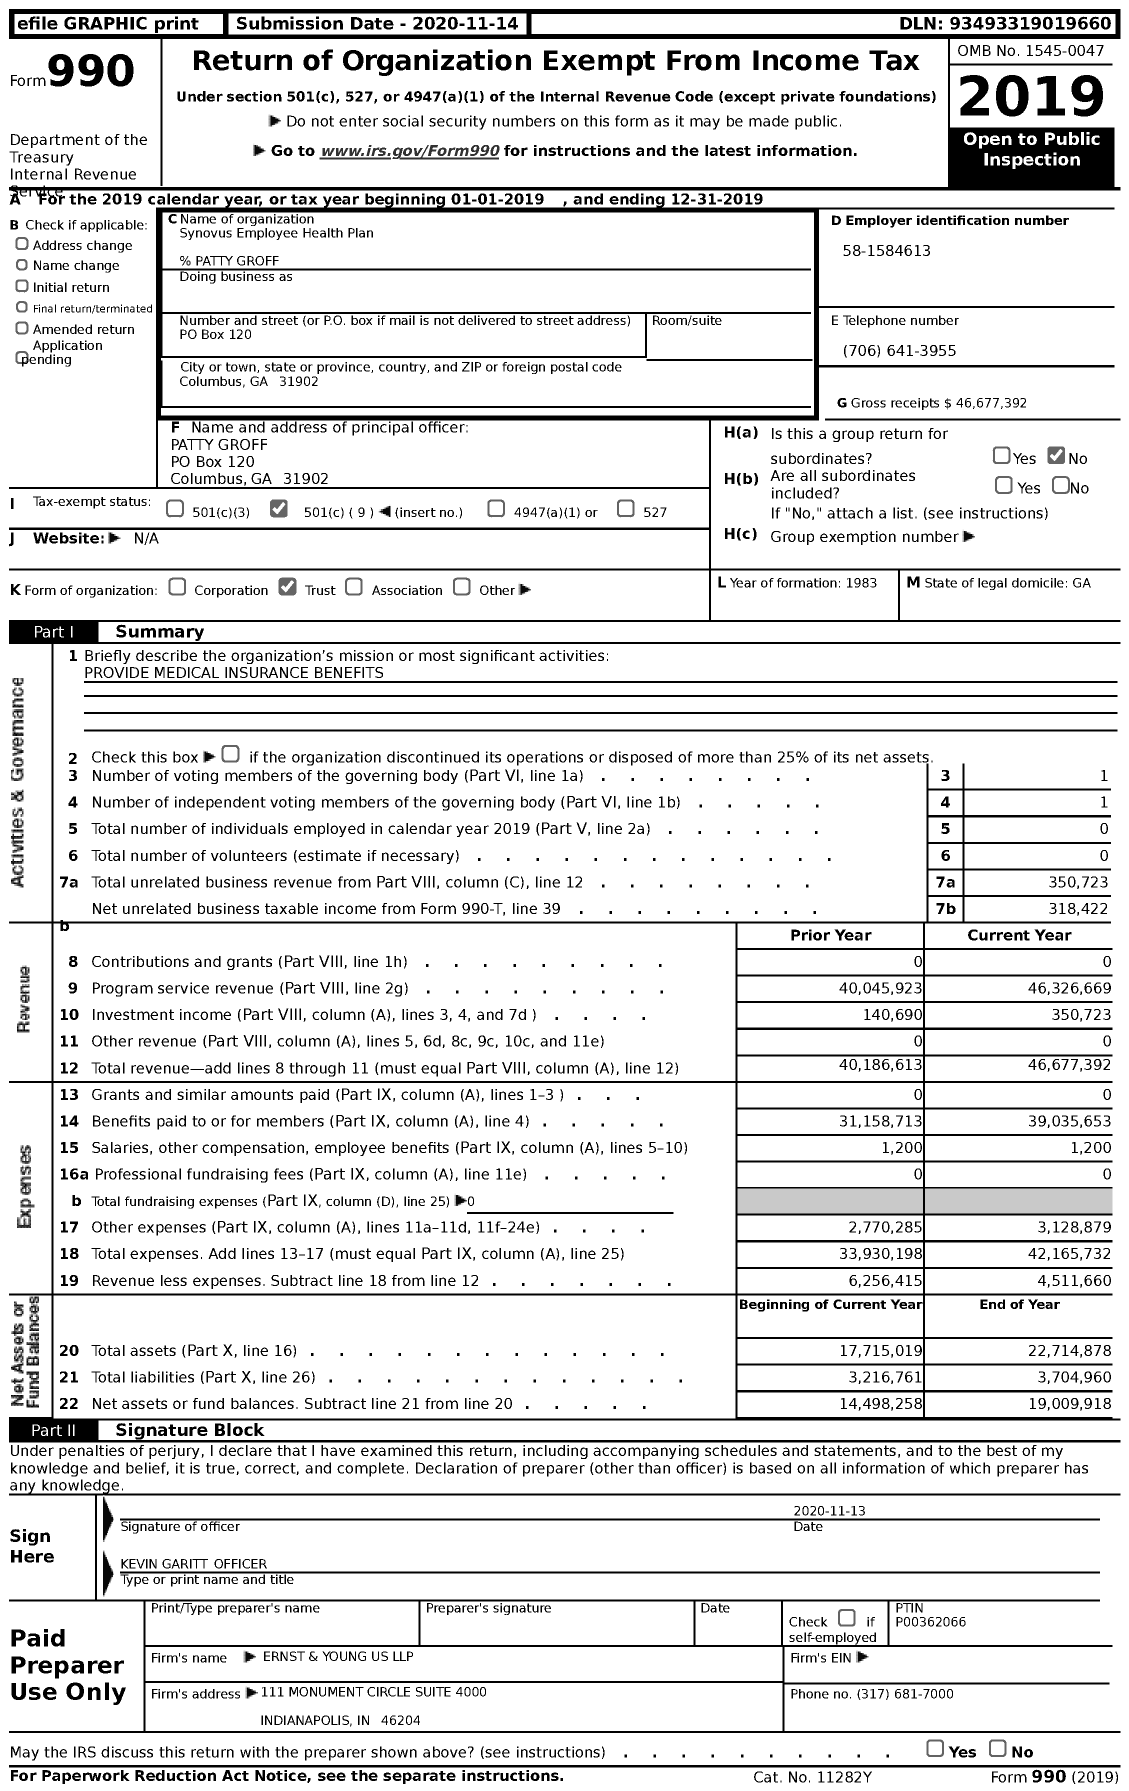 Image of first page of 2019 Form 990 for Synovus Employee Health Plan